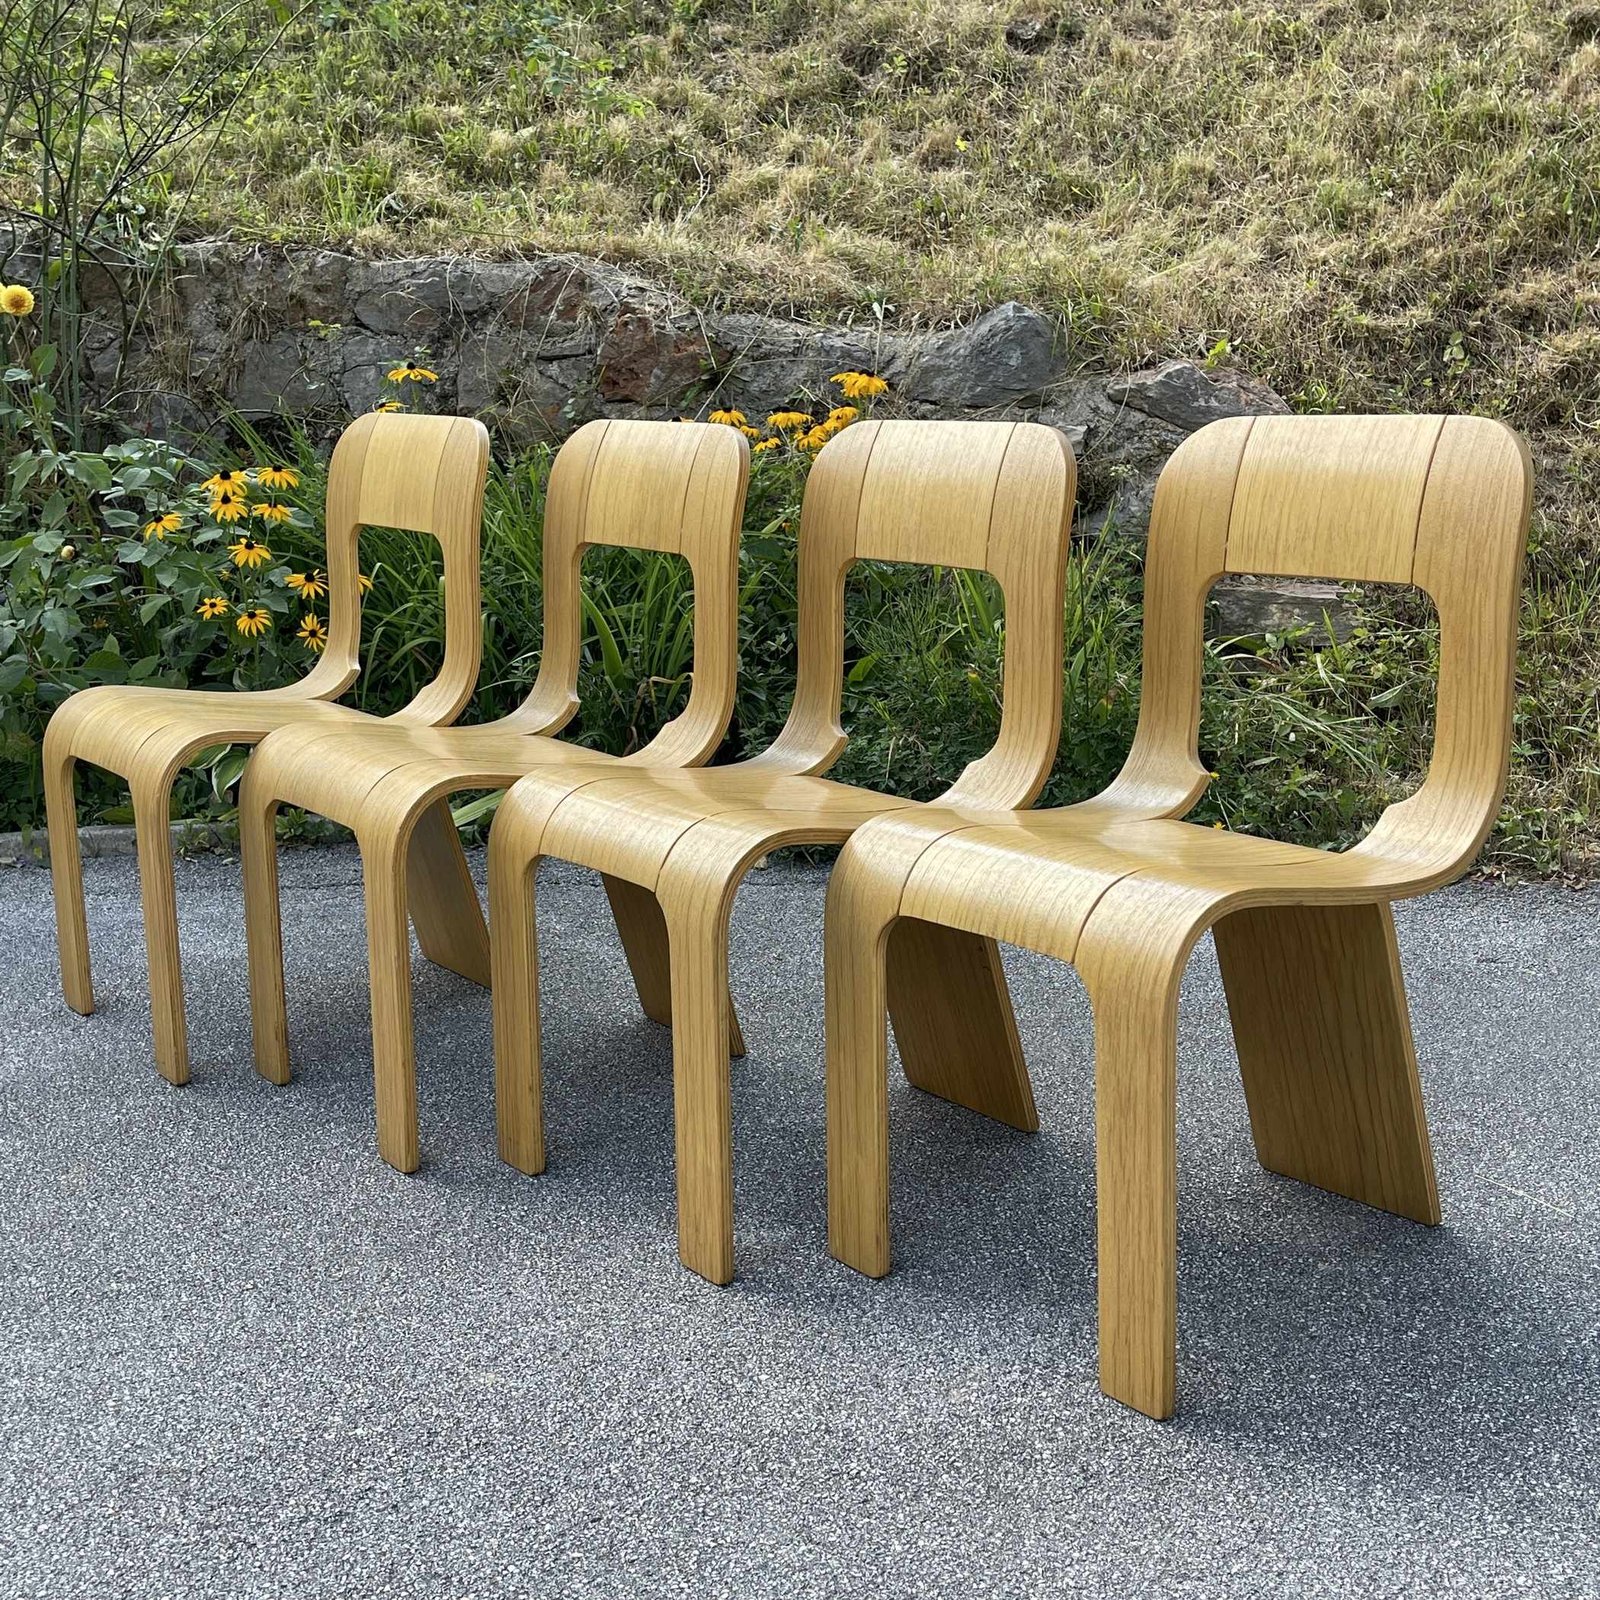 Set of 4 plywood dining chairs Esse by Gigi Sabadin for Stilwood Italy 1973s Mid-century modern stackable chairs